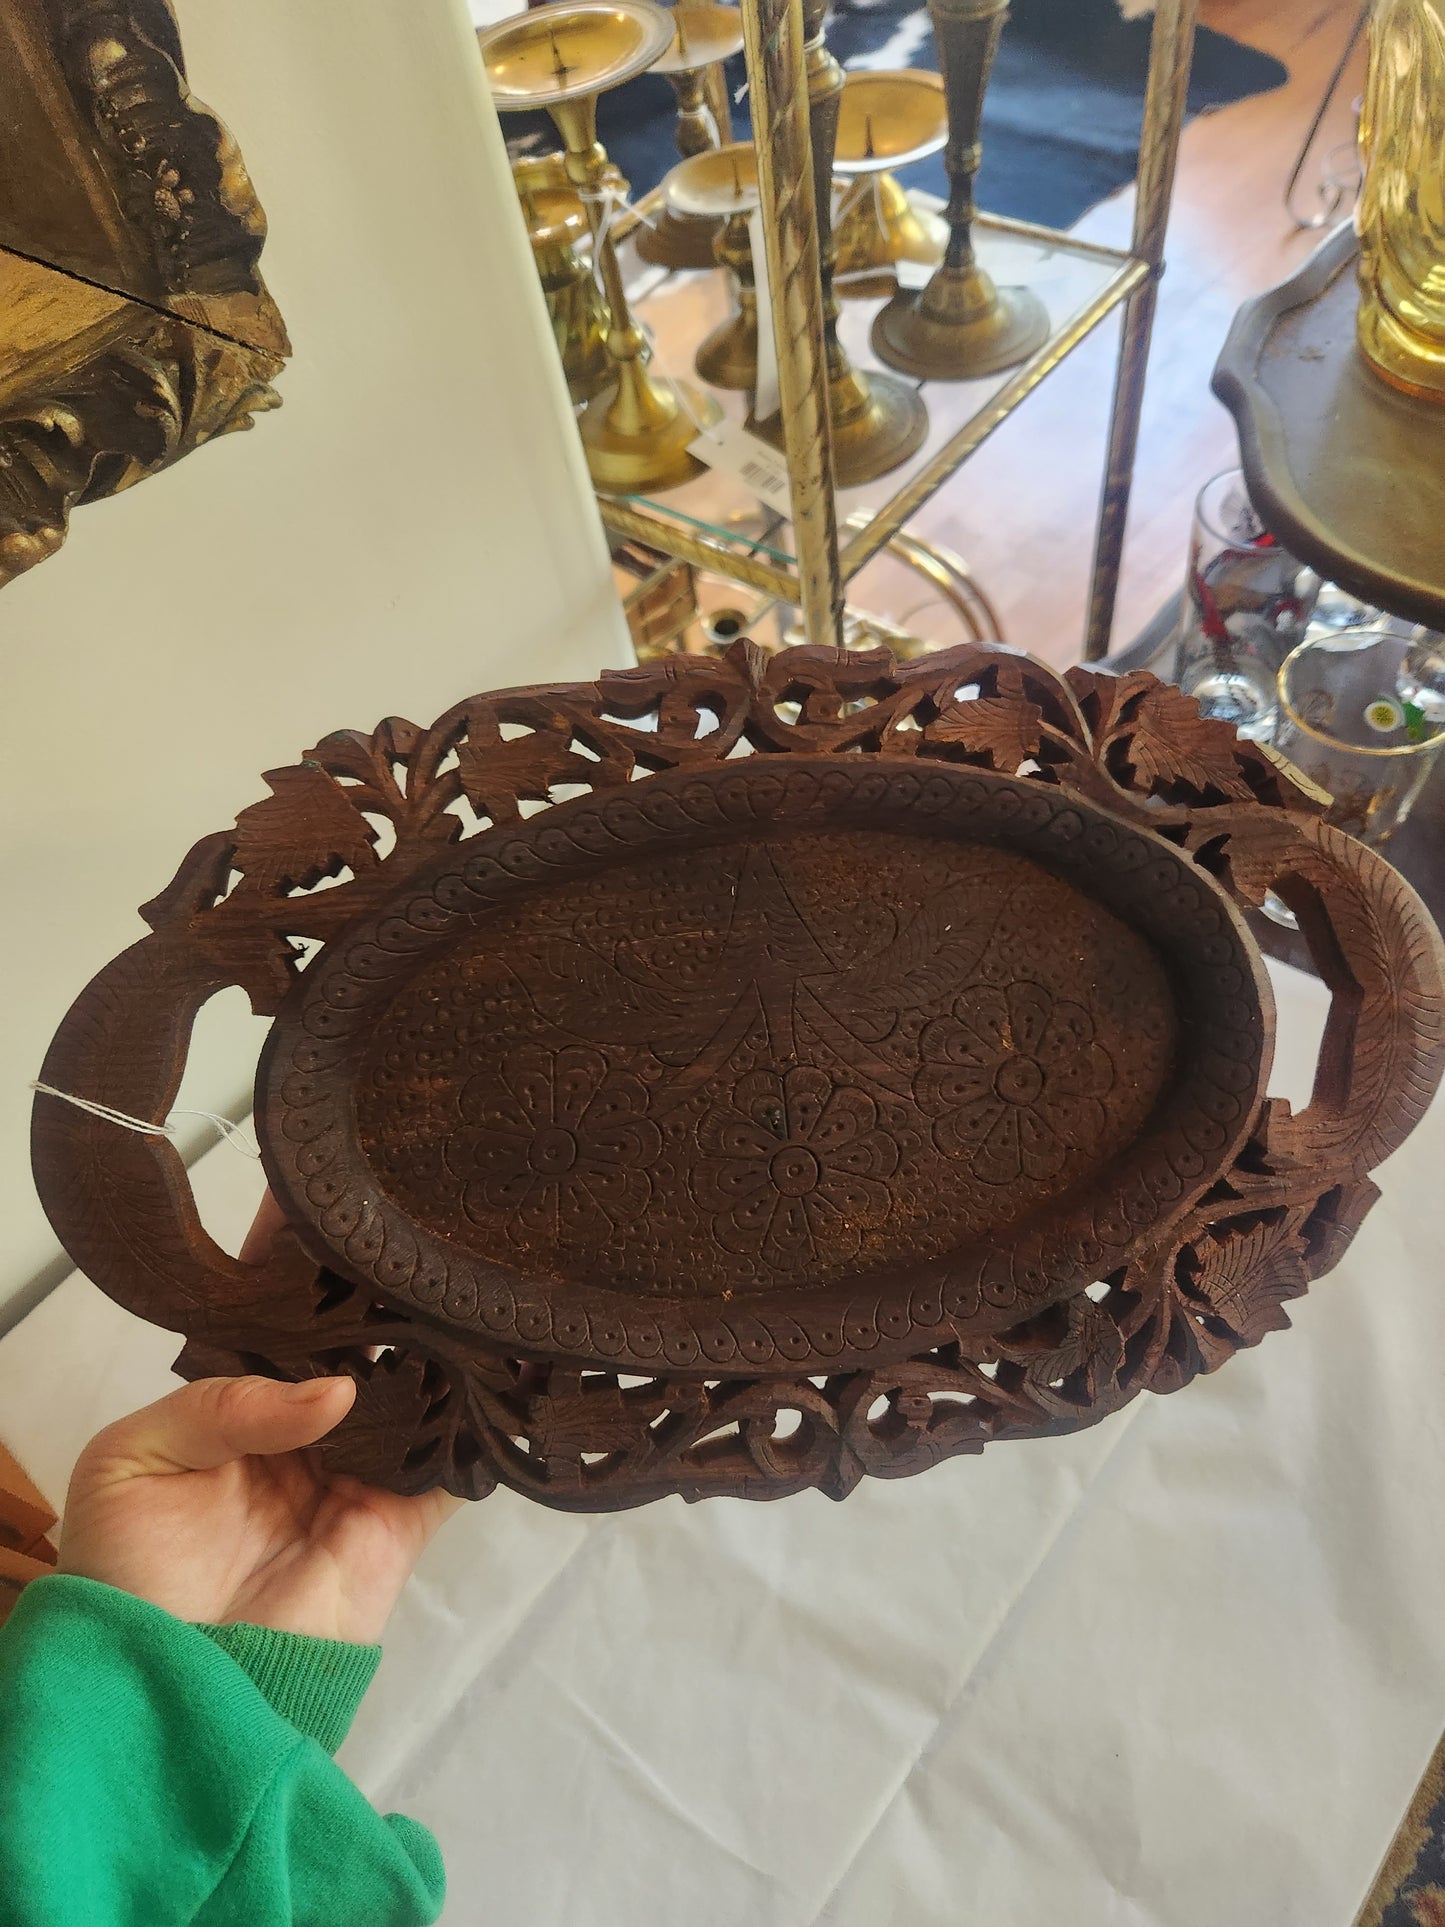 Hand Carved Wooden Tray